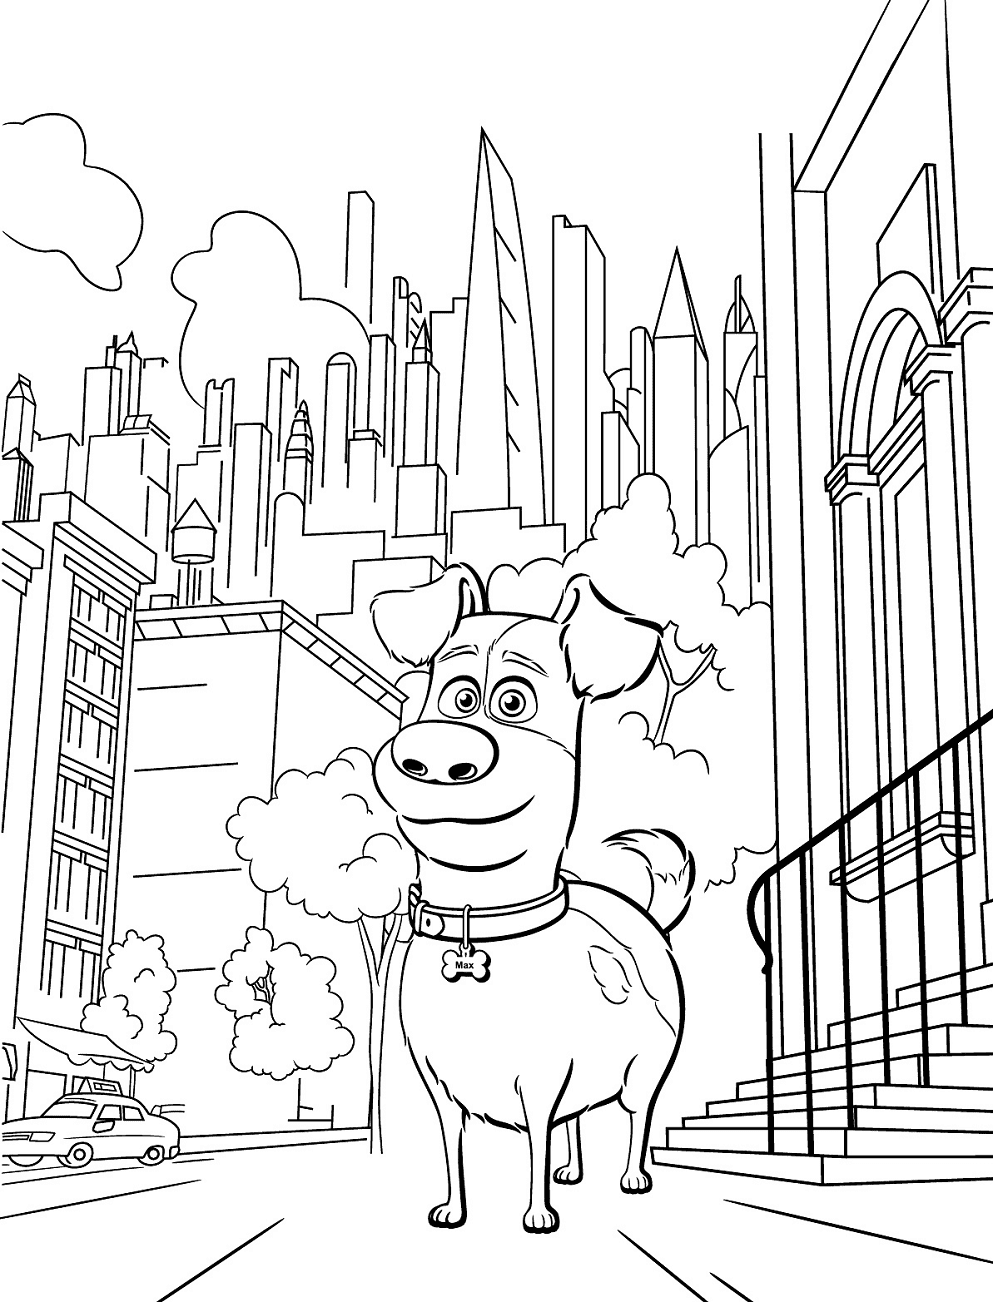 Max in the city Coloring Pages